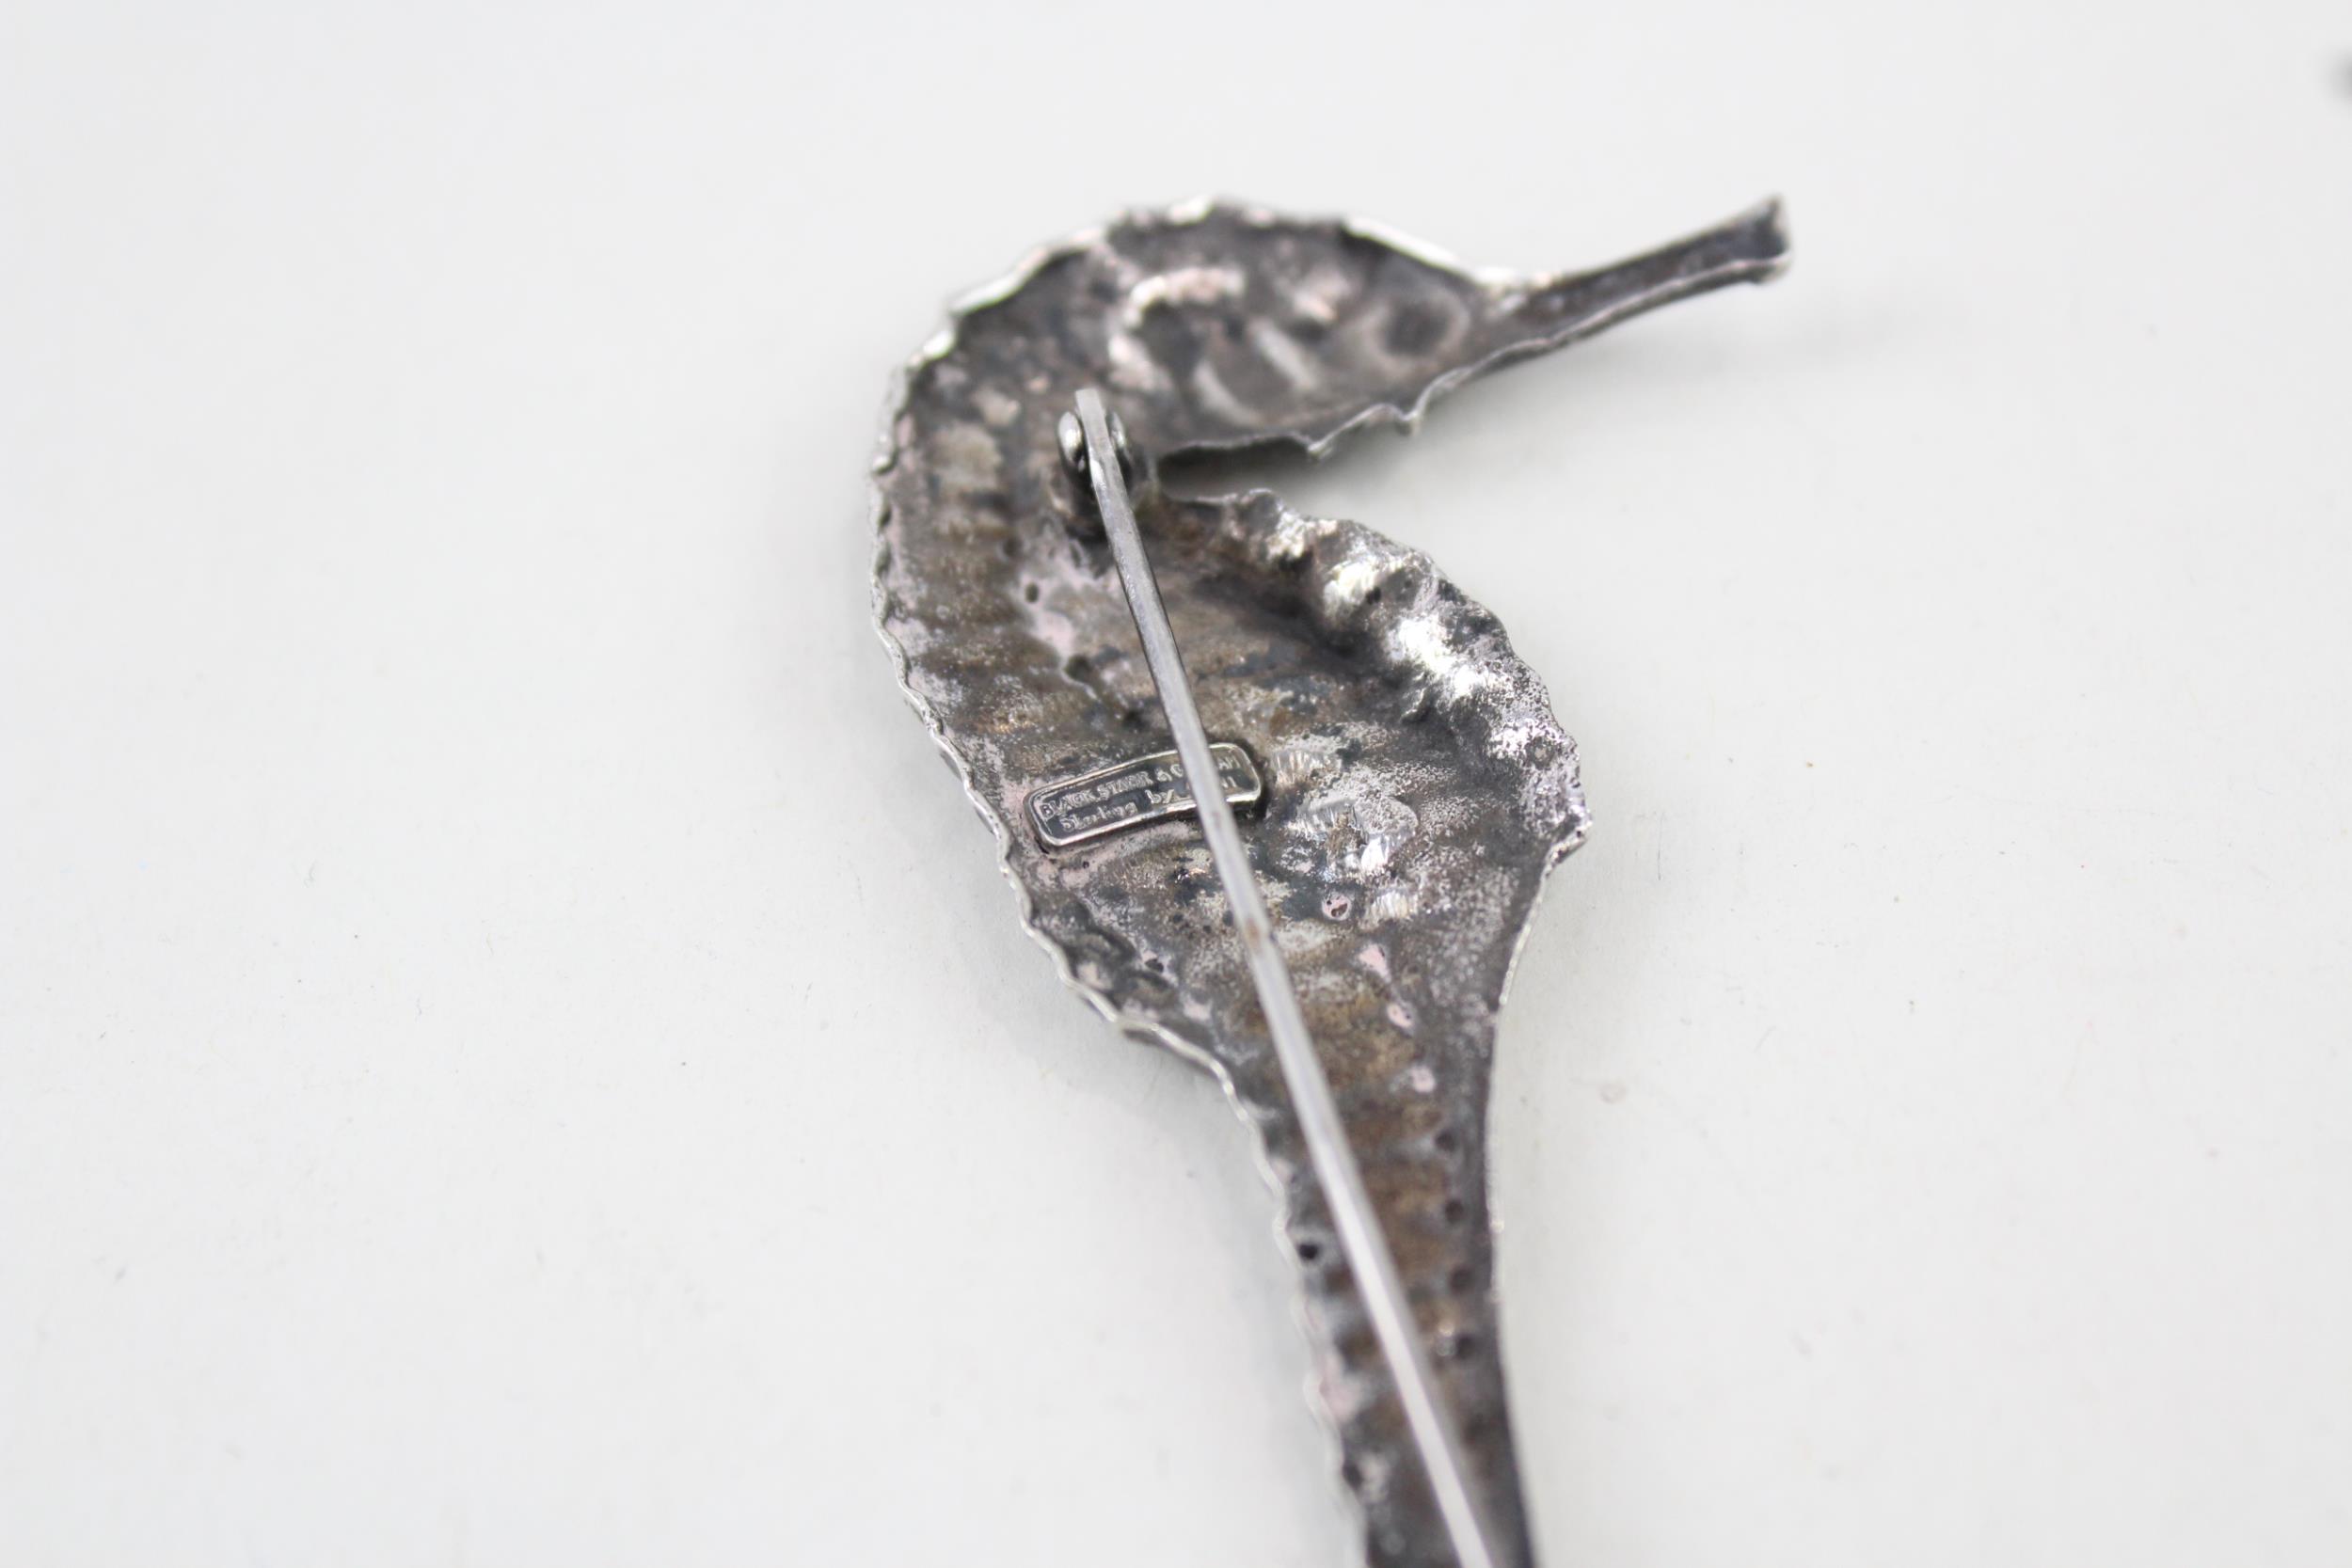 Silver seahorse brooch stamped Black, Starr & Gorham by Cini (15g) - Image 5 of 7